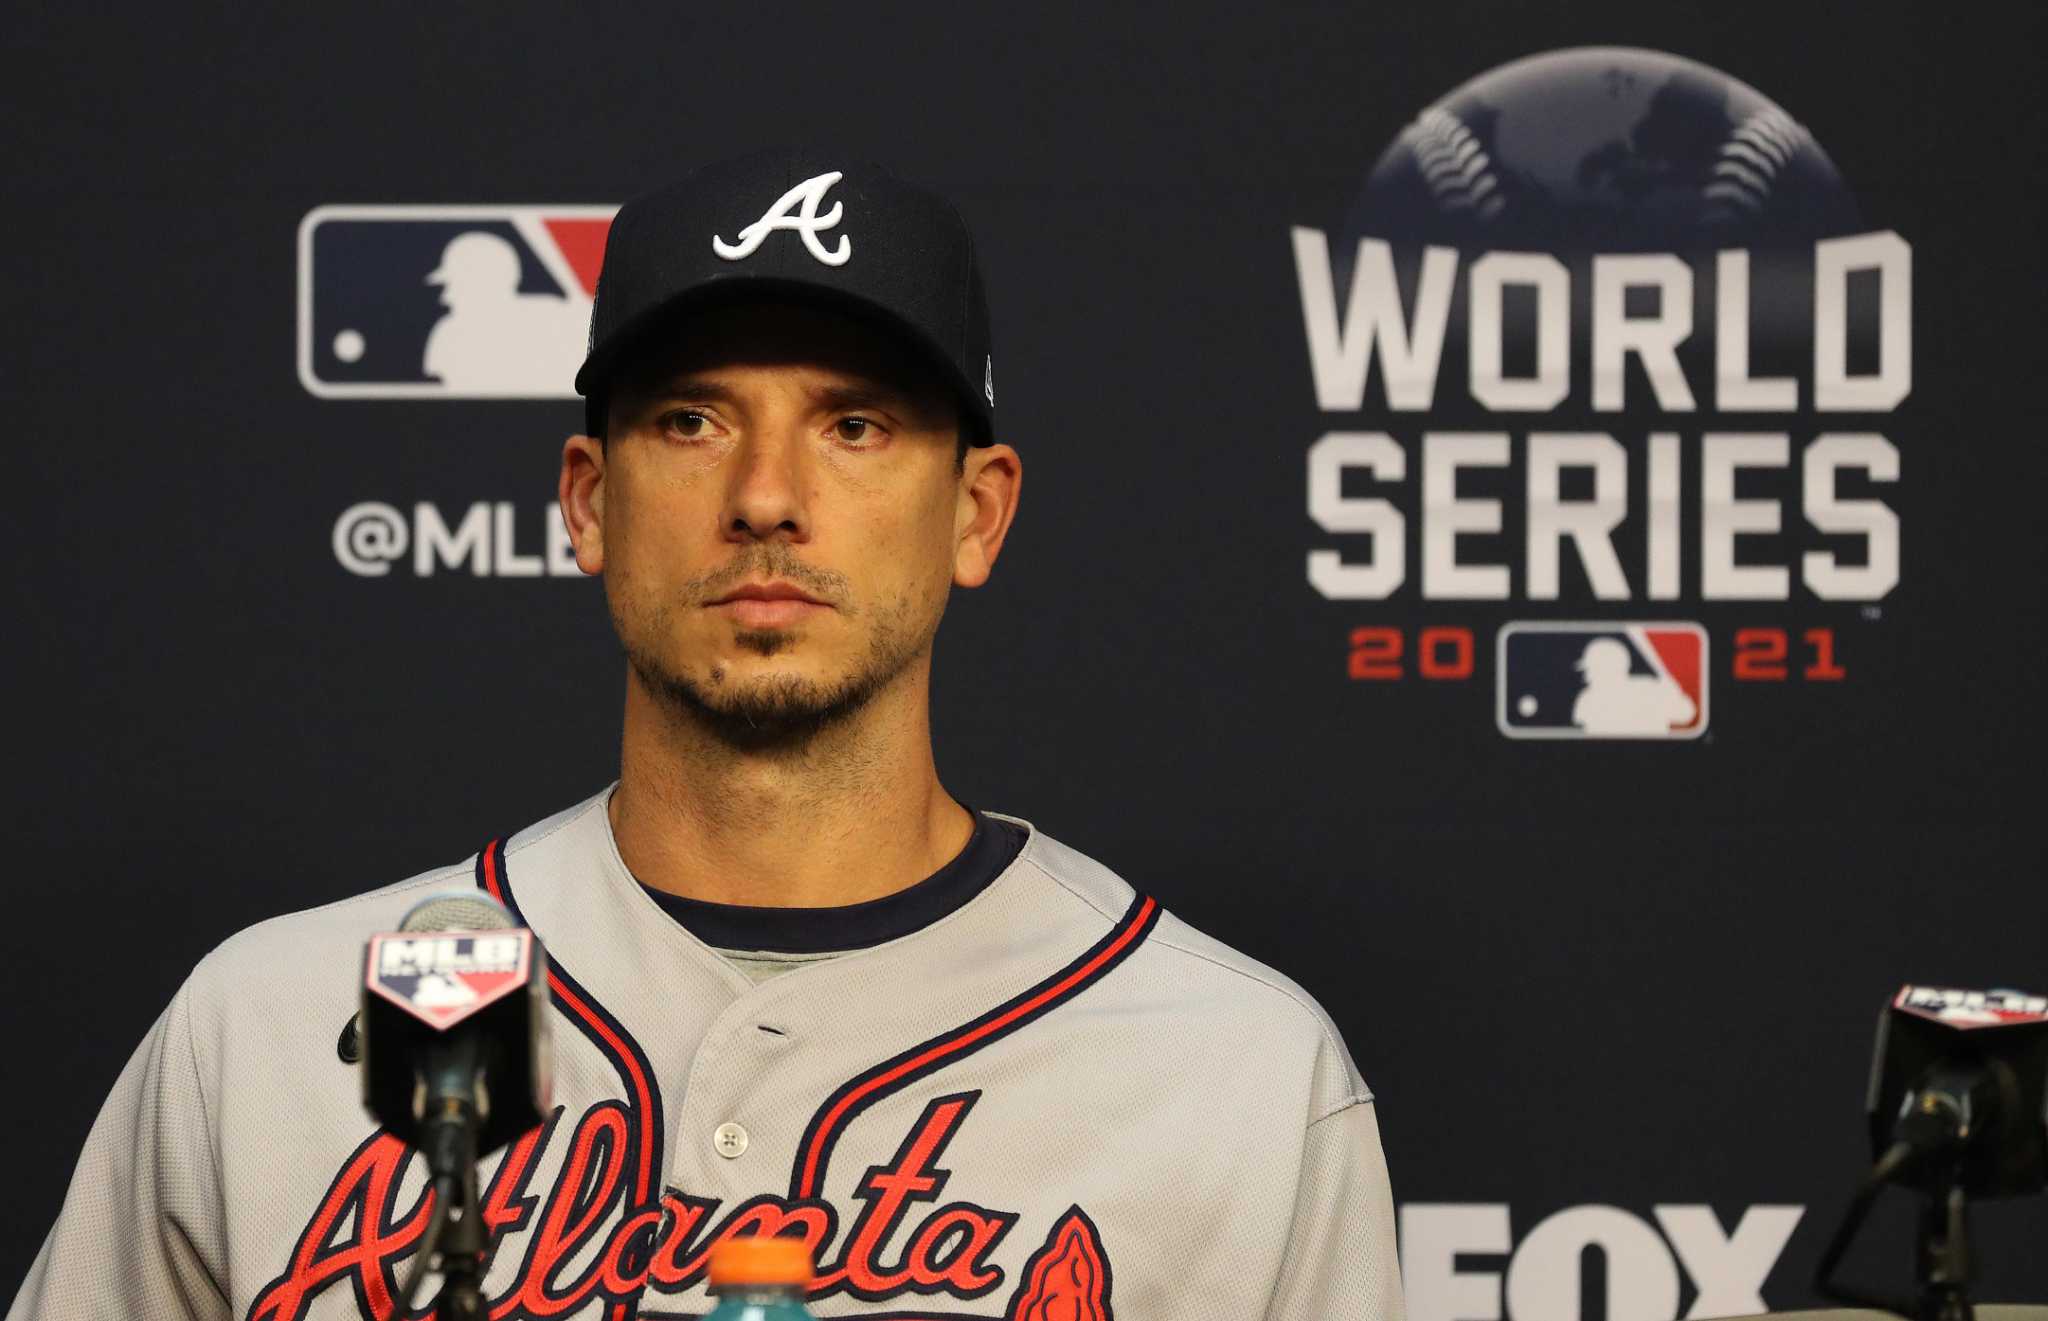 Charlie Morton agrees to deal with Rays